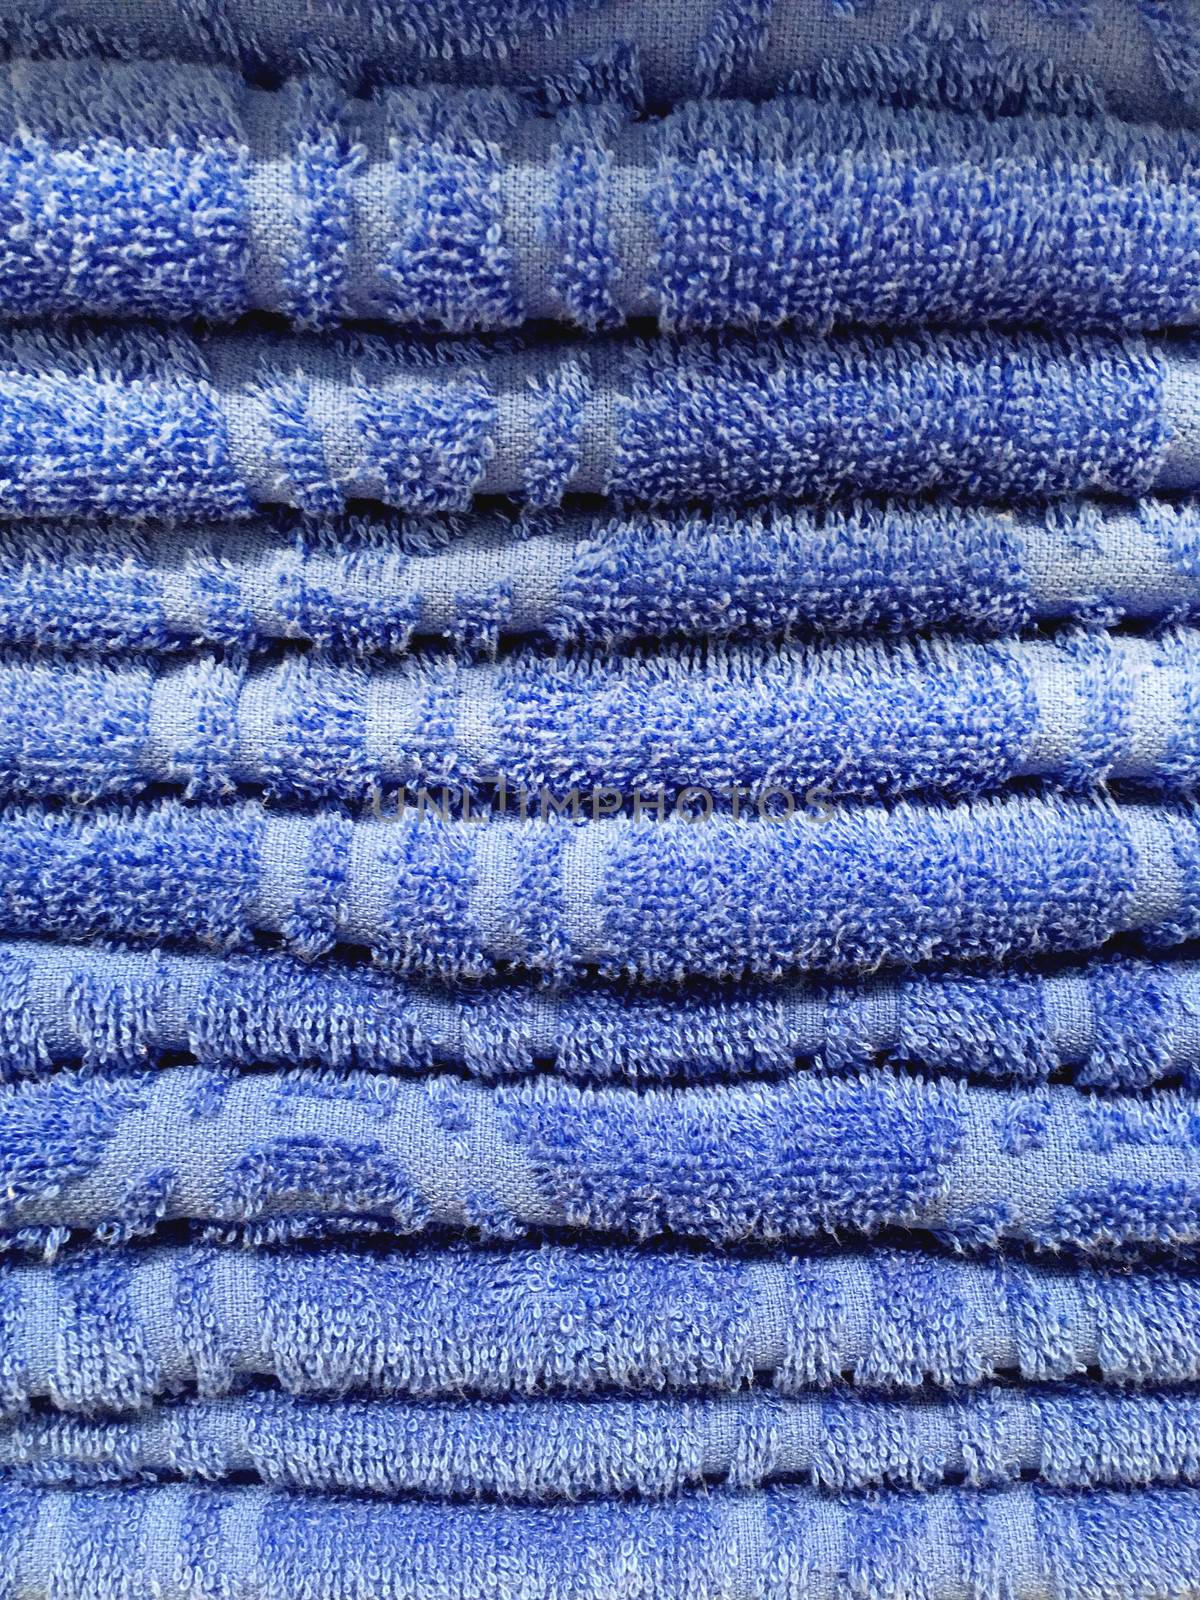 Stack of blue terry towels. Pile of textile bath accessories.